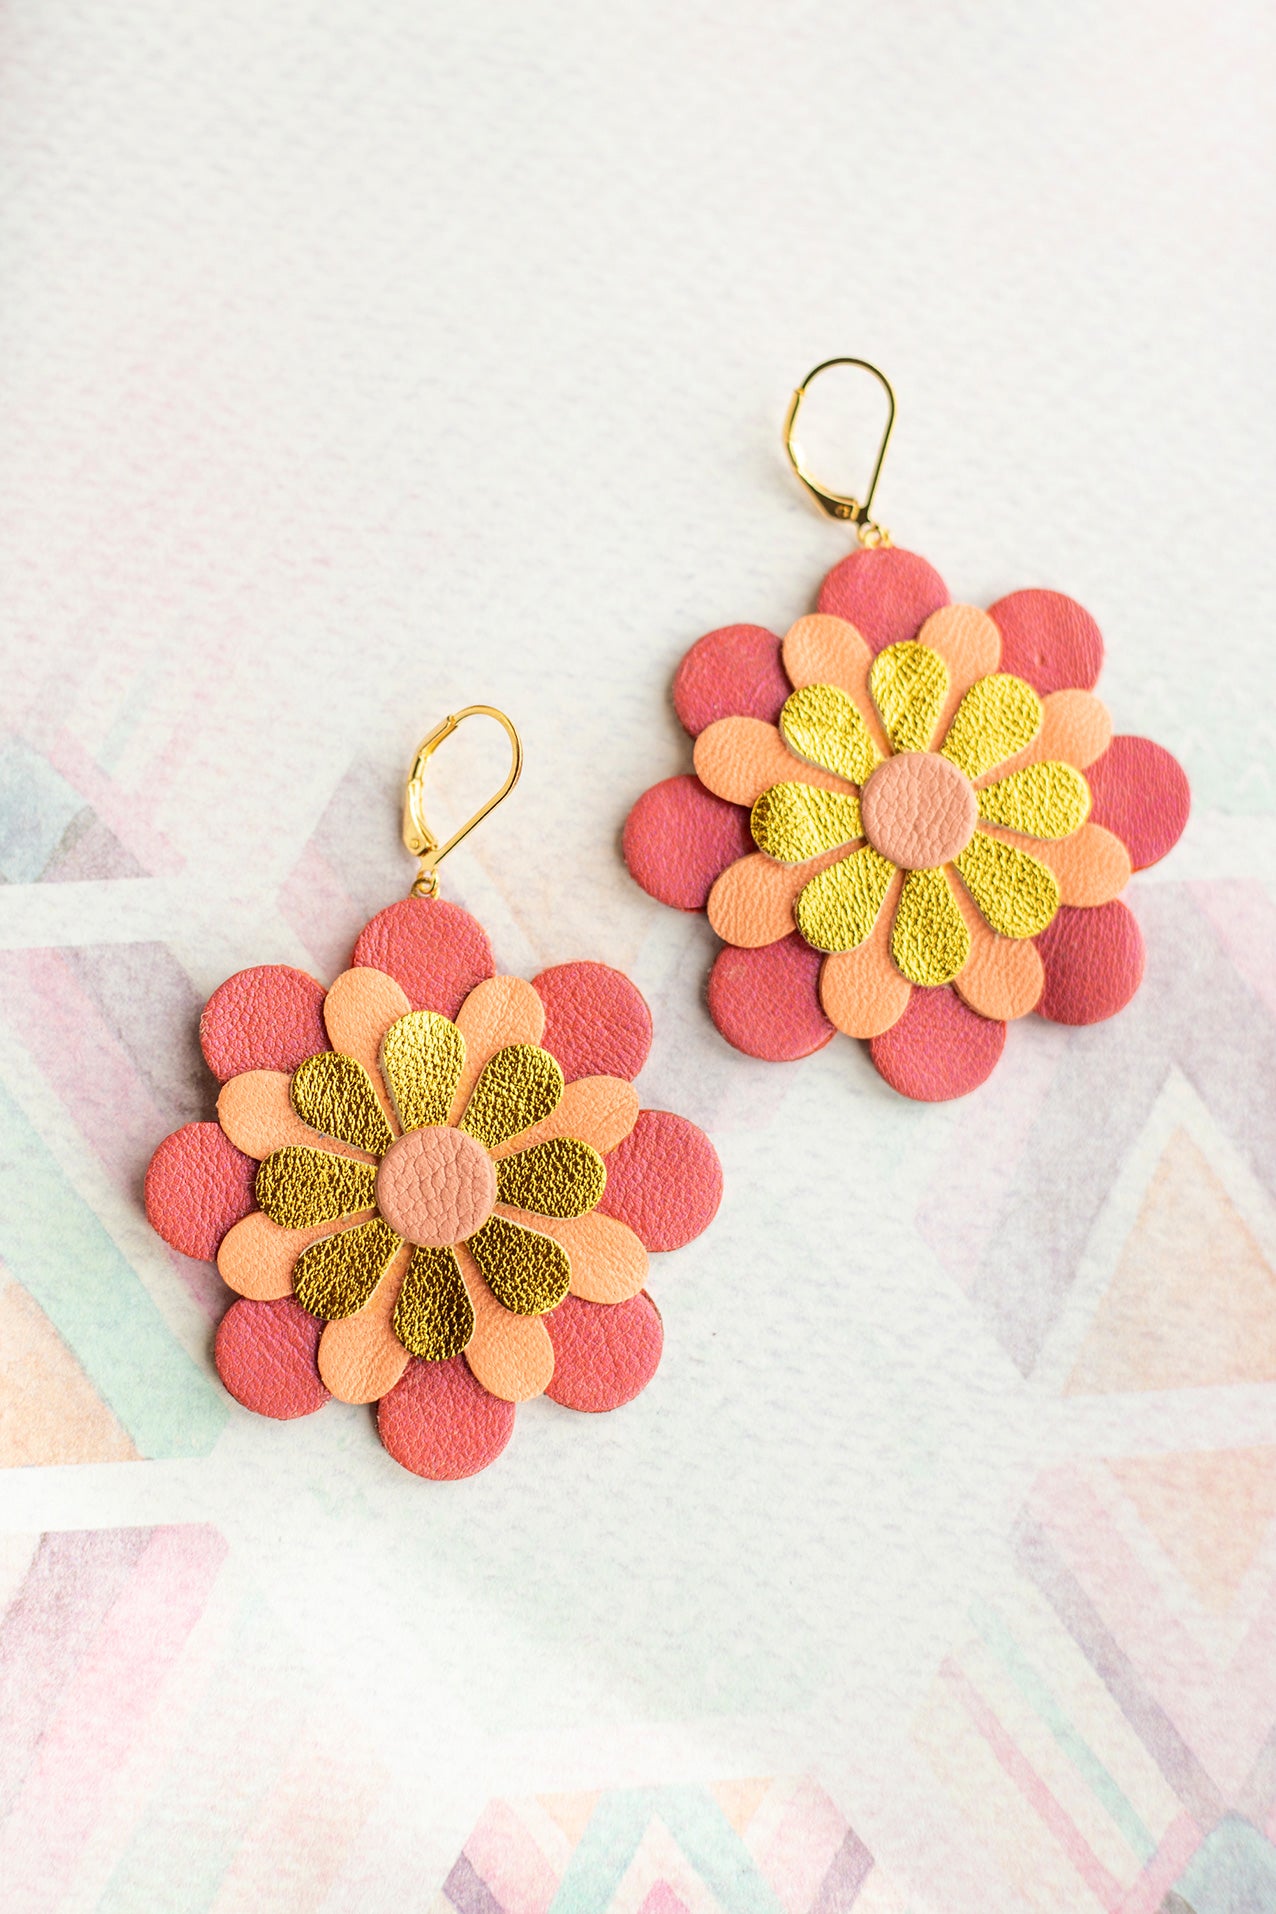 Zinnia flower earrings - gold leather, salmon pink and raspberry